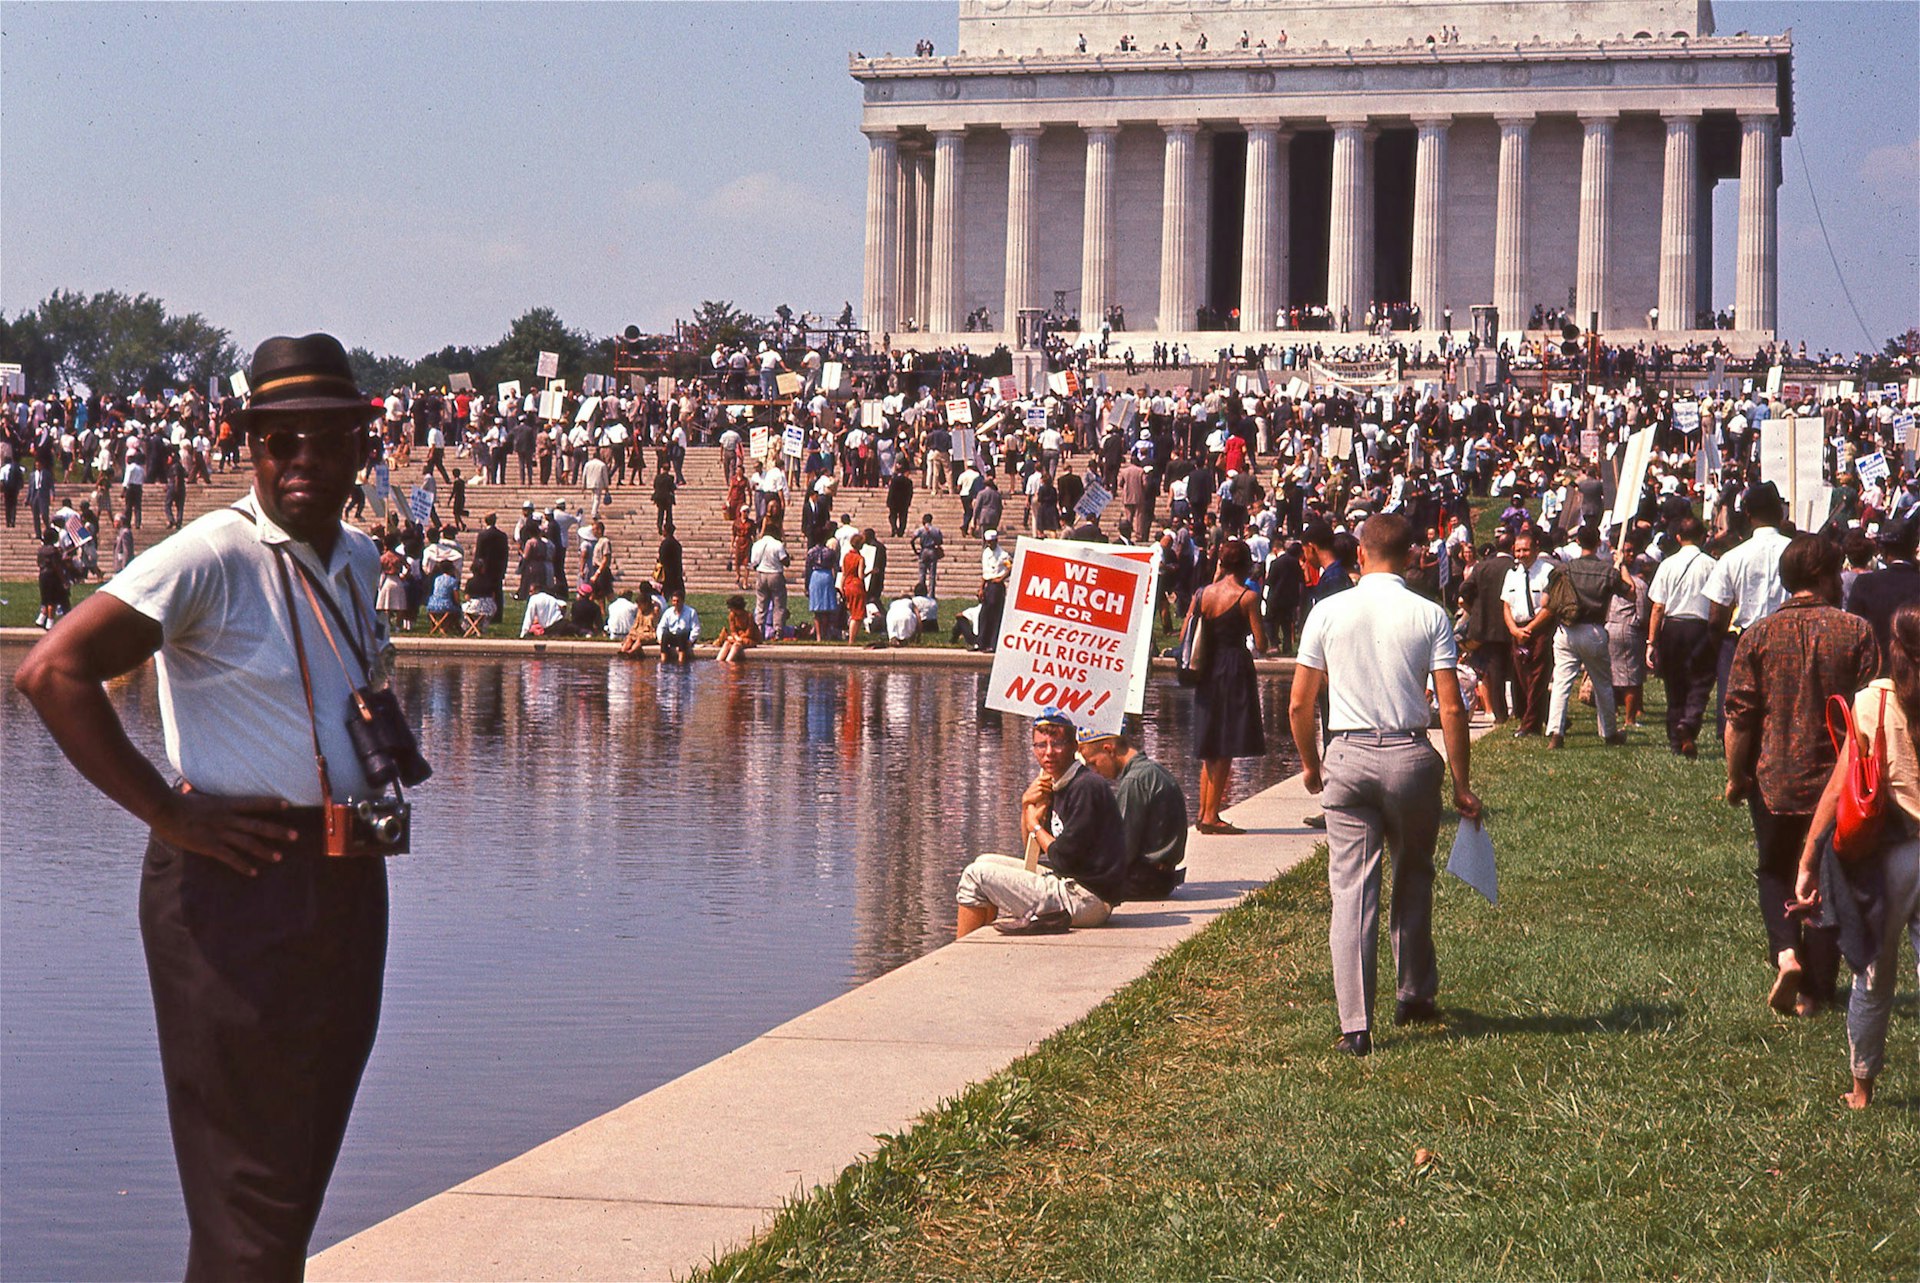 Crowds gather at the Lincoln Memorial for the March on Washington, 1963. Photo courtesy of Magnolia Pictures.